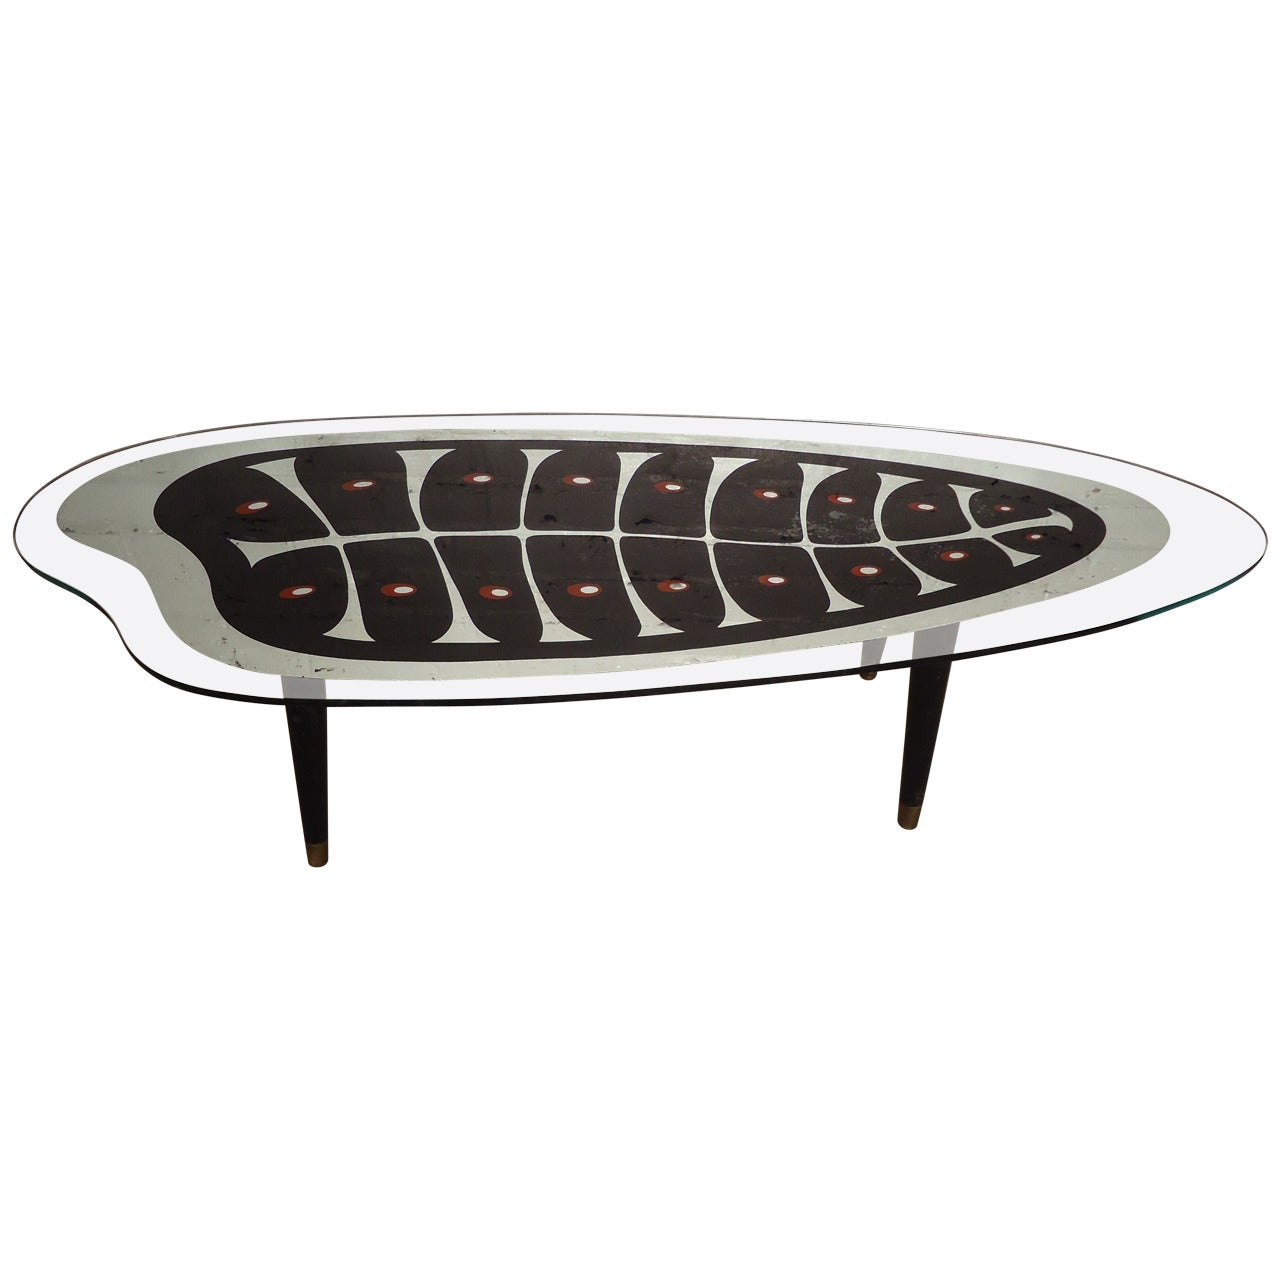 Rare Mid-century Mirrored Coffee Table with Painted Design